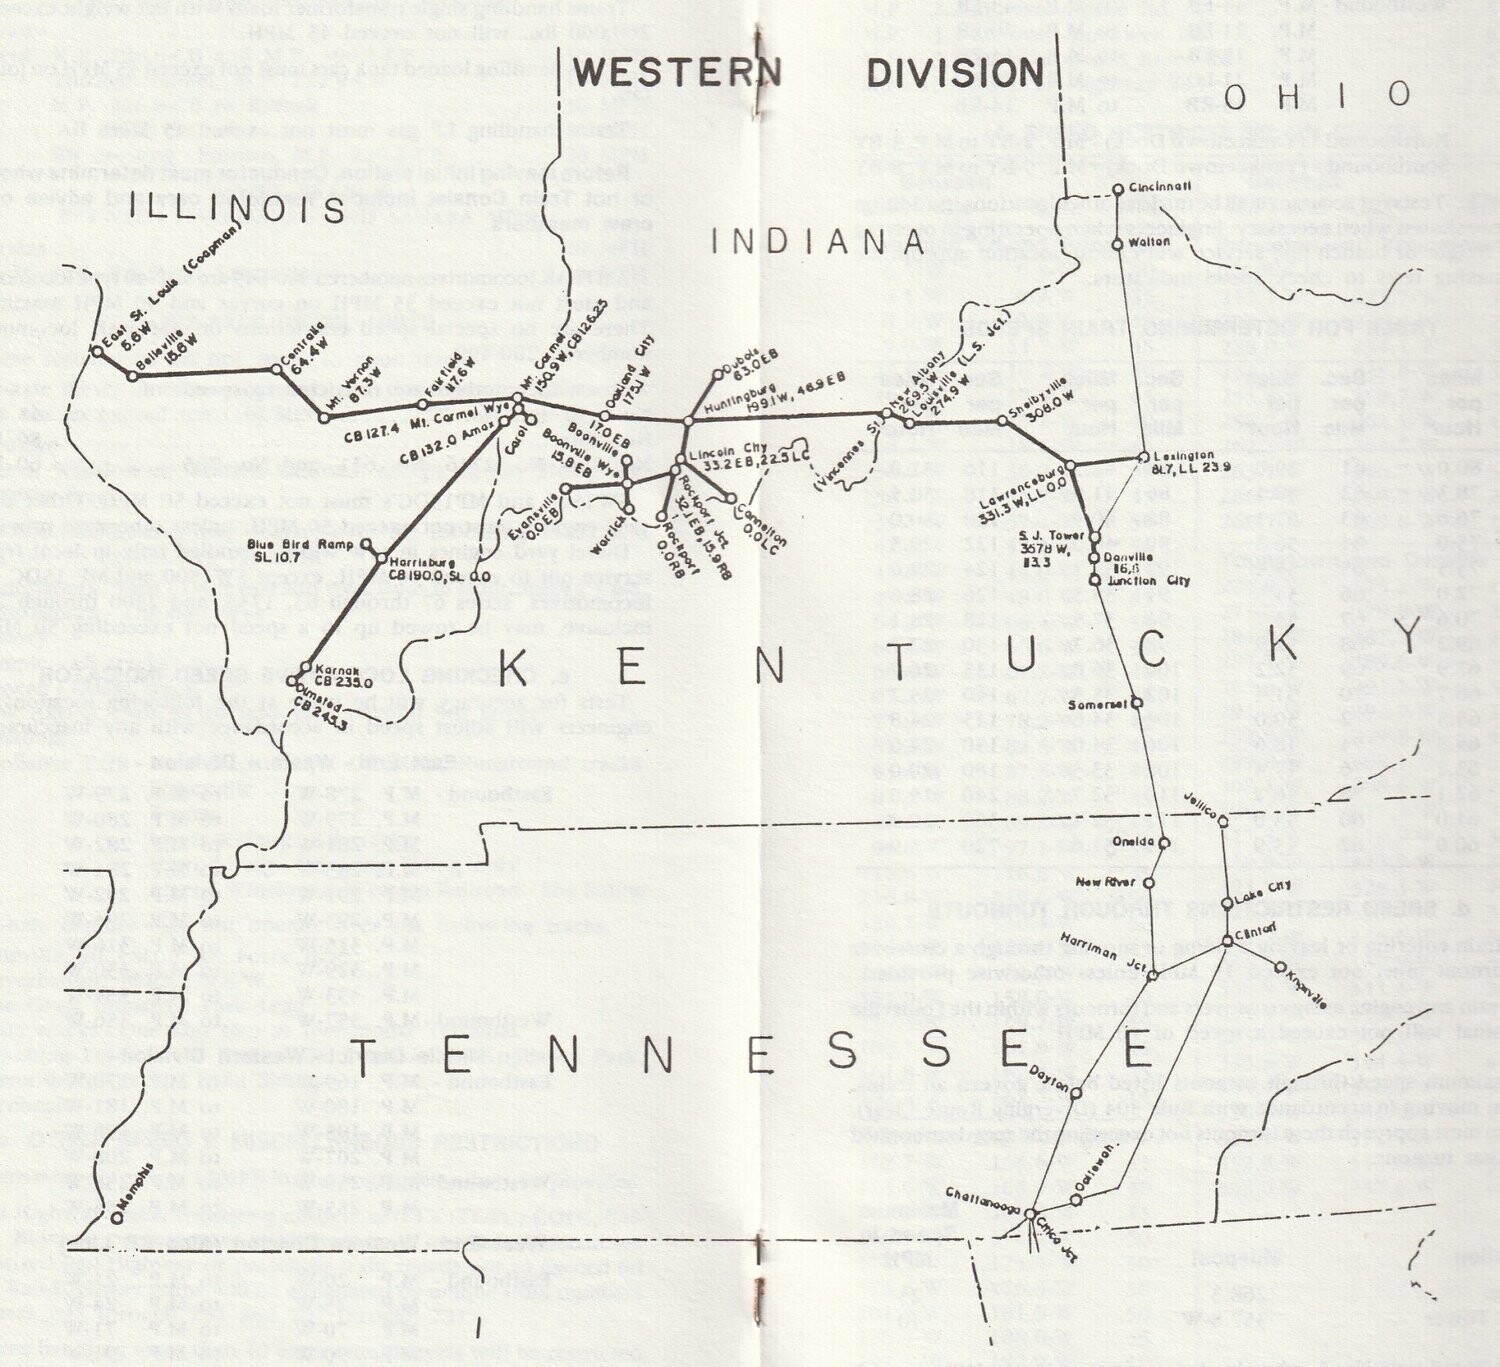 Norfolk Southern Western Division map 1985